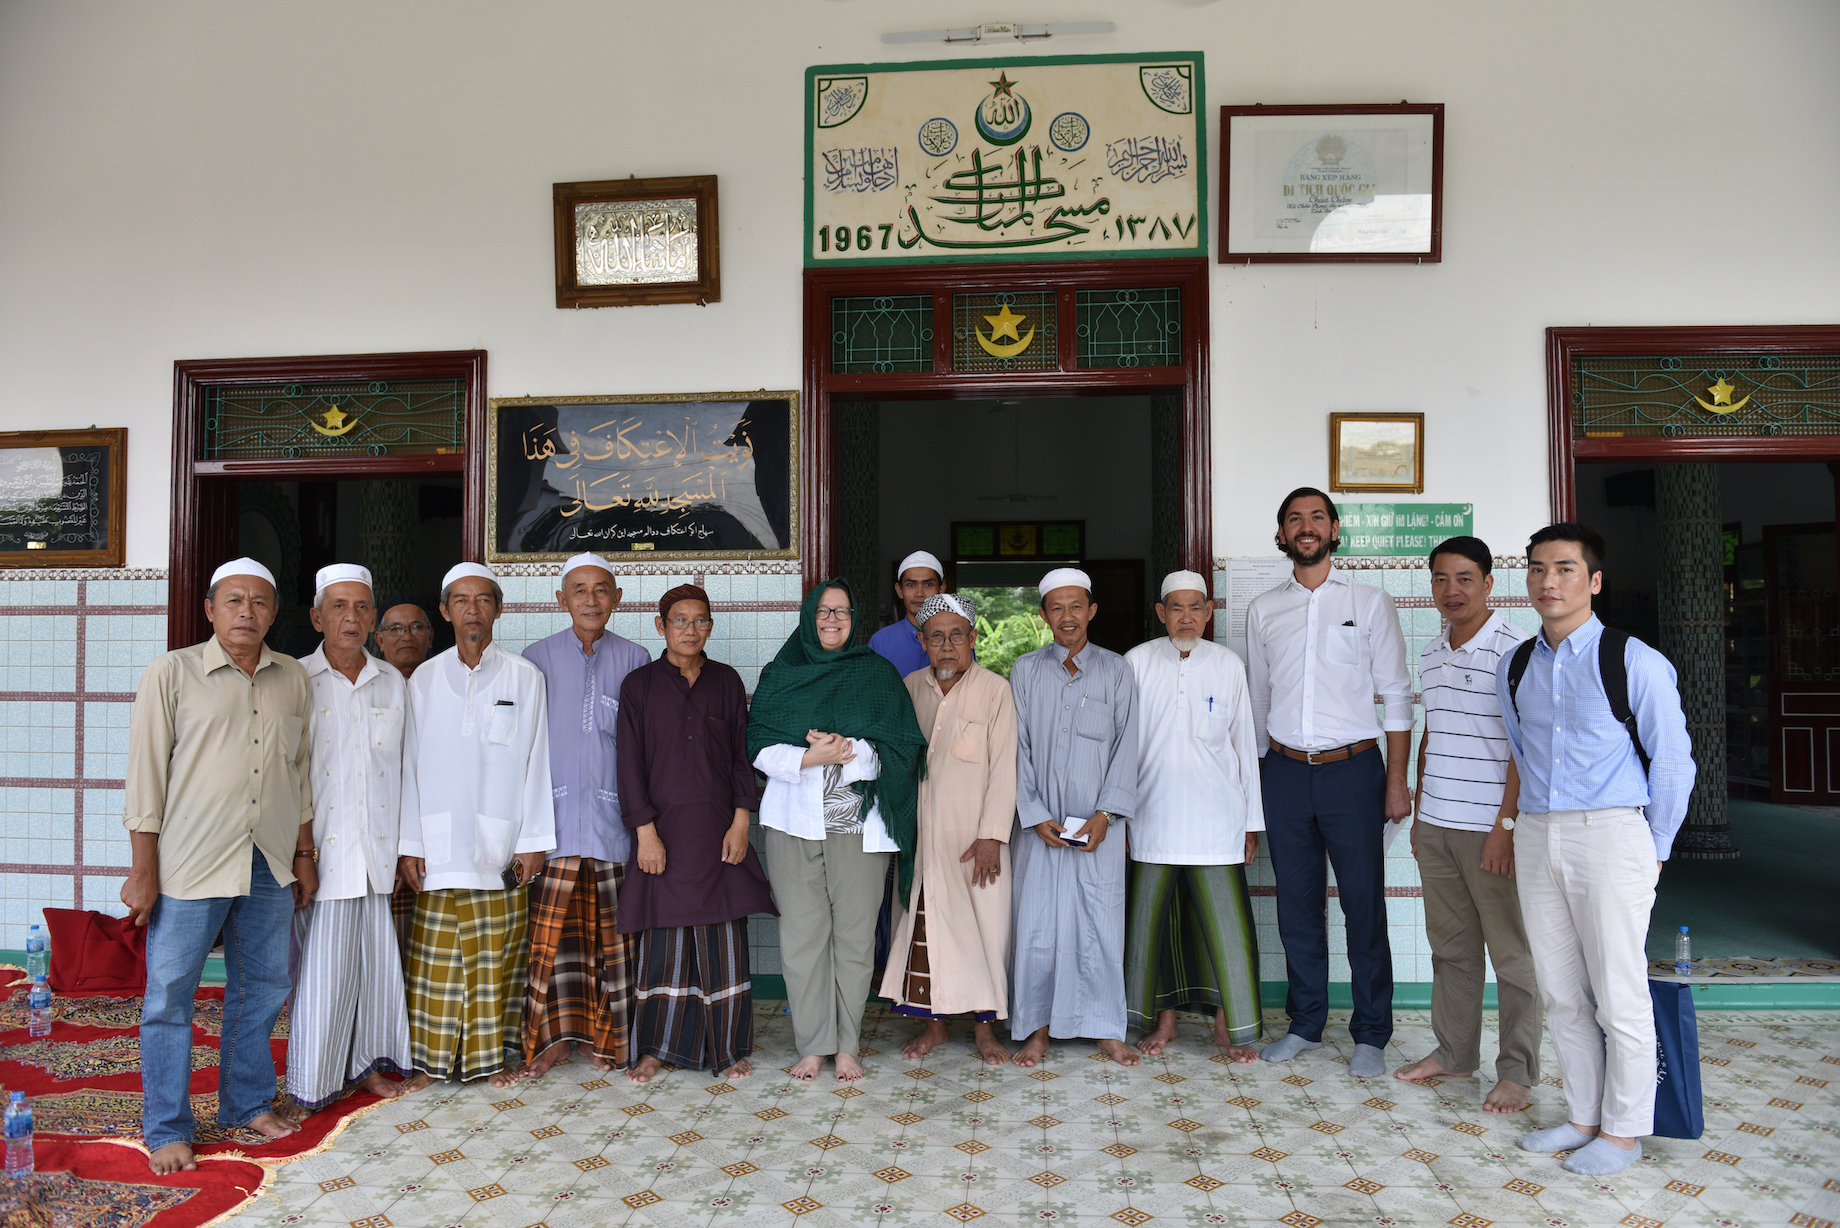 U.S. Consul General Marie Damour meets with Cham Muslim community leaders during a visit to An Giang Province, Vietnam on November 18, 2019. Photo: U.S. Consulate General in Ho Chi Minh City